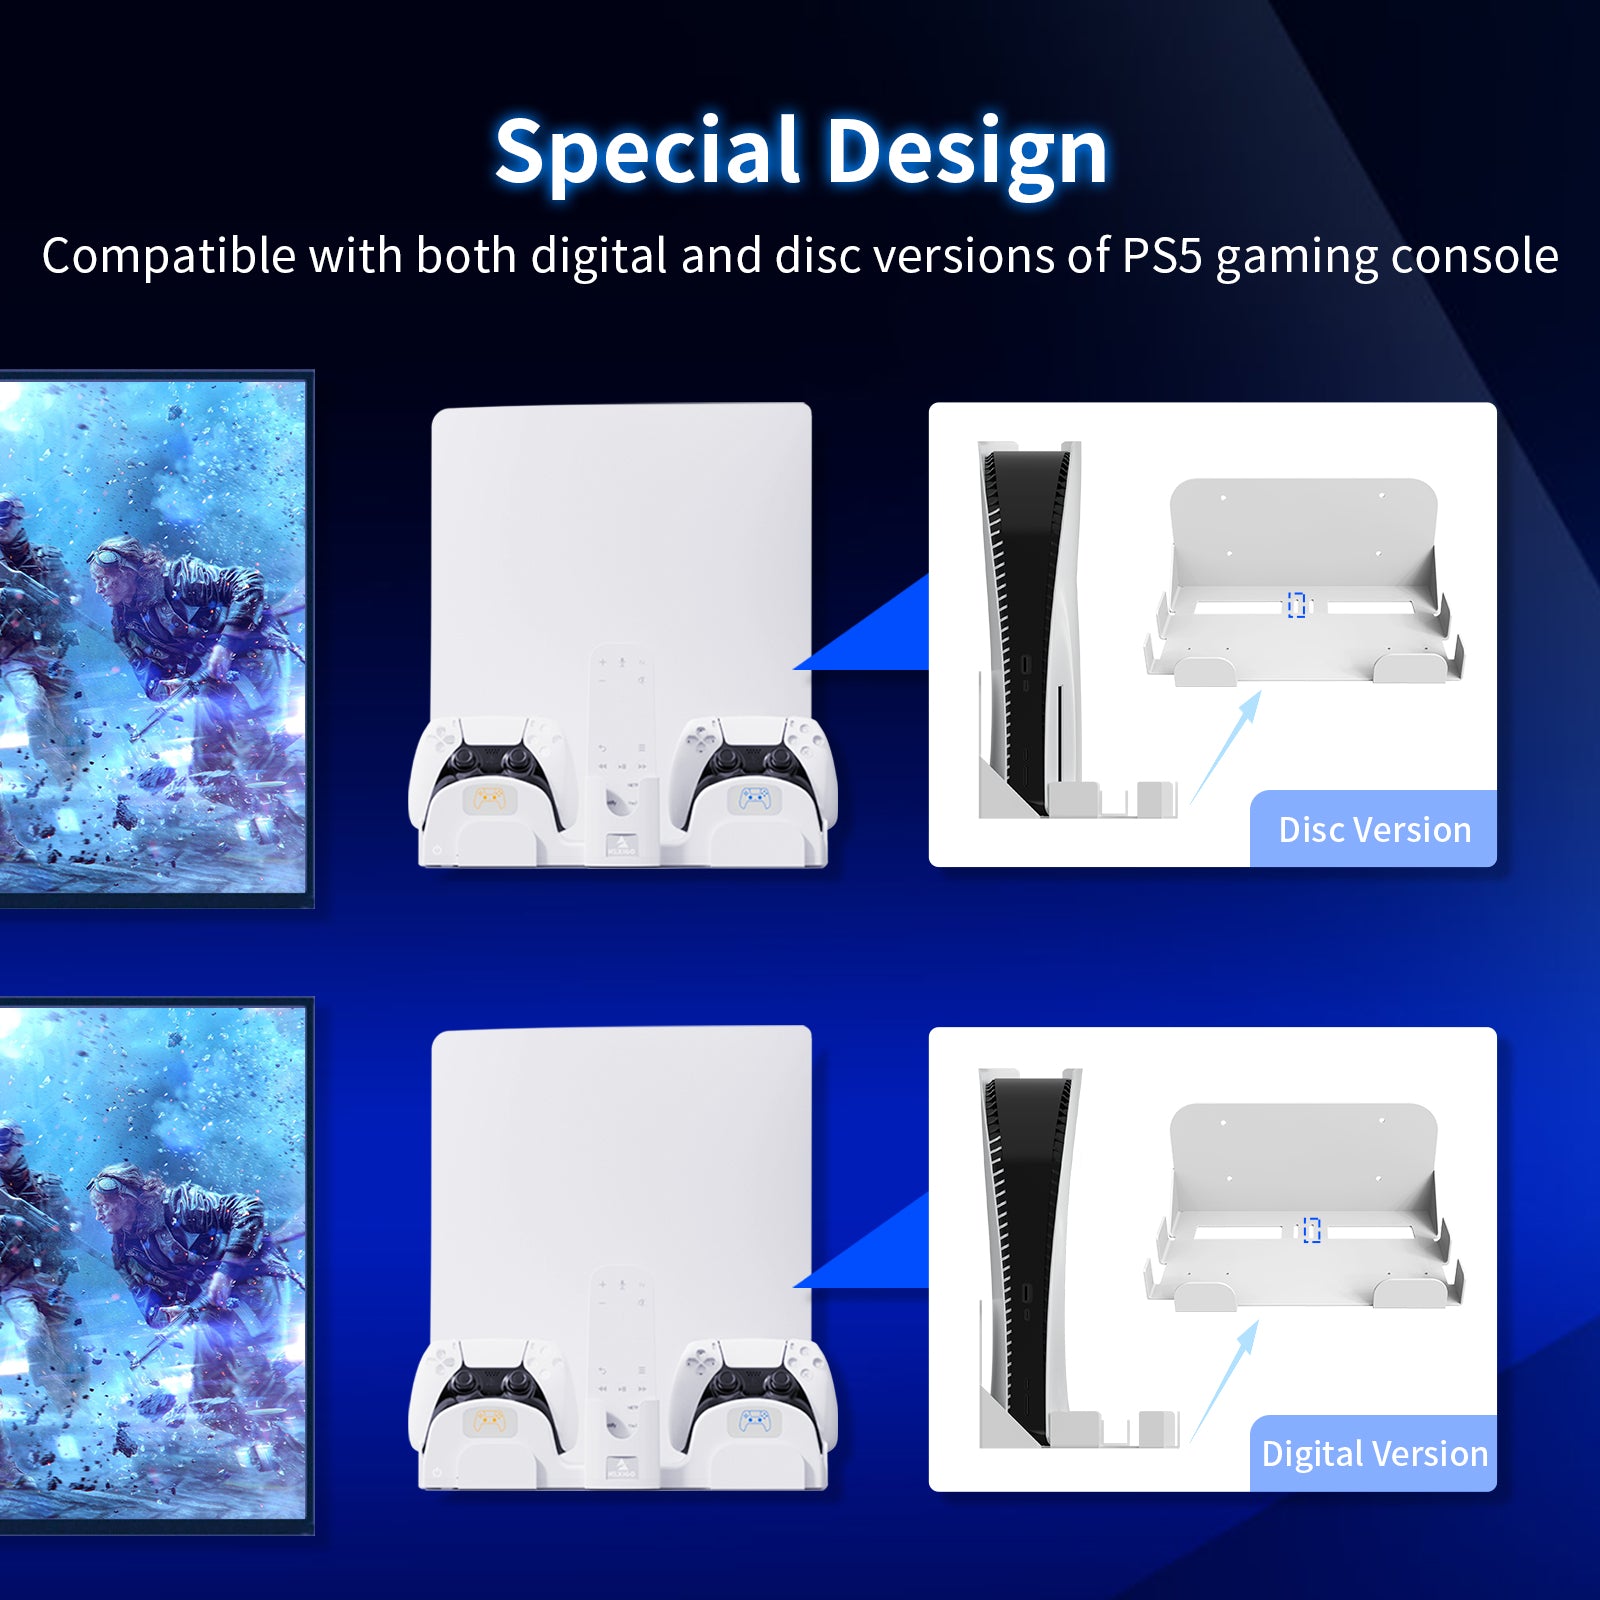 The PS5 Wall Mount with Controller Charger is compatible with both digital and disc versions of the PS5.